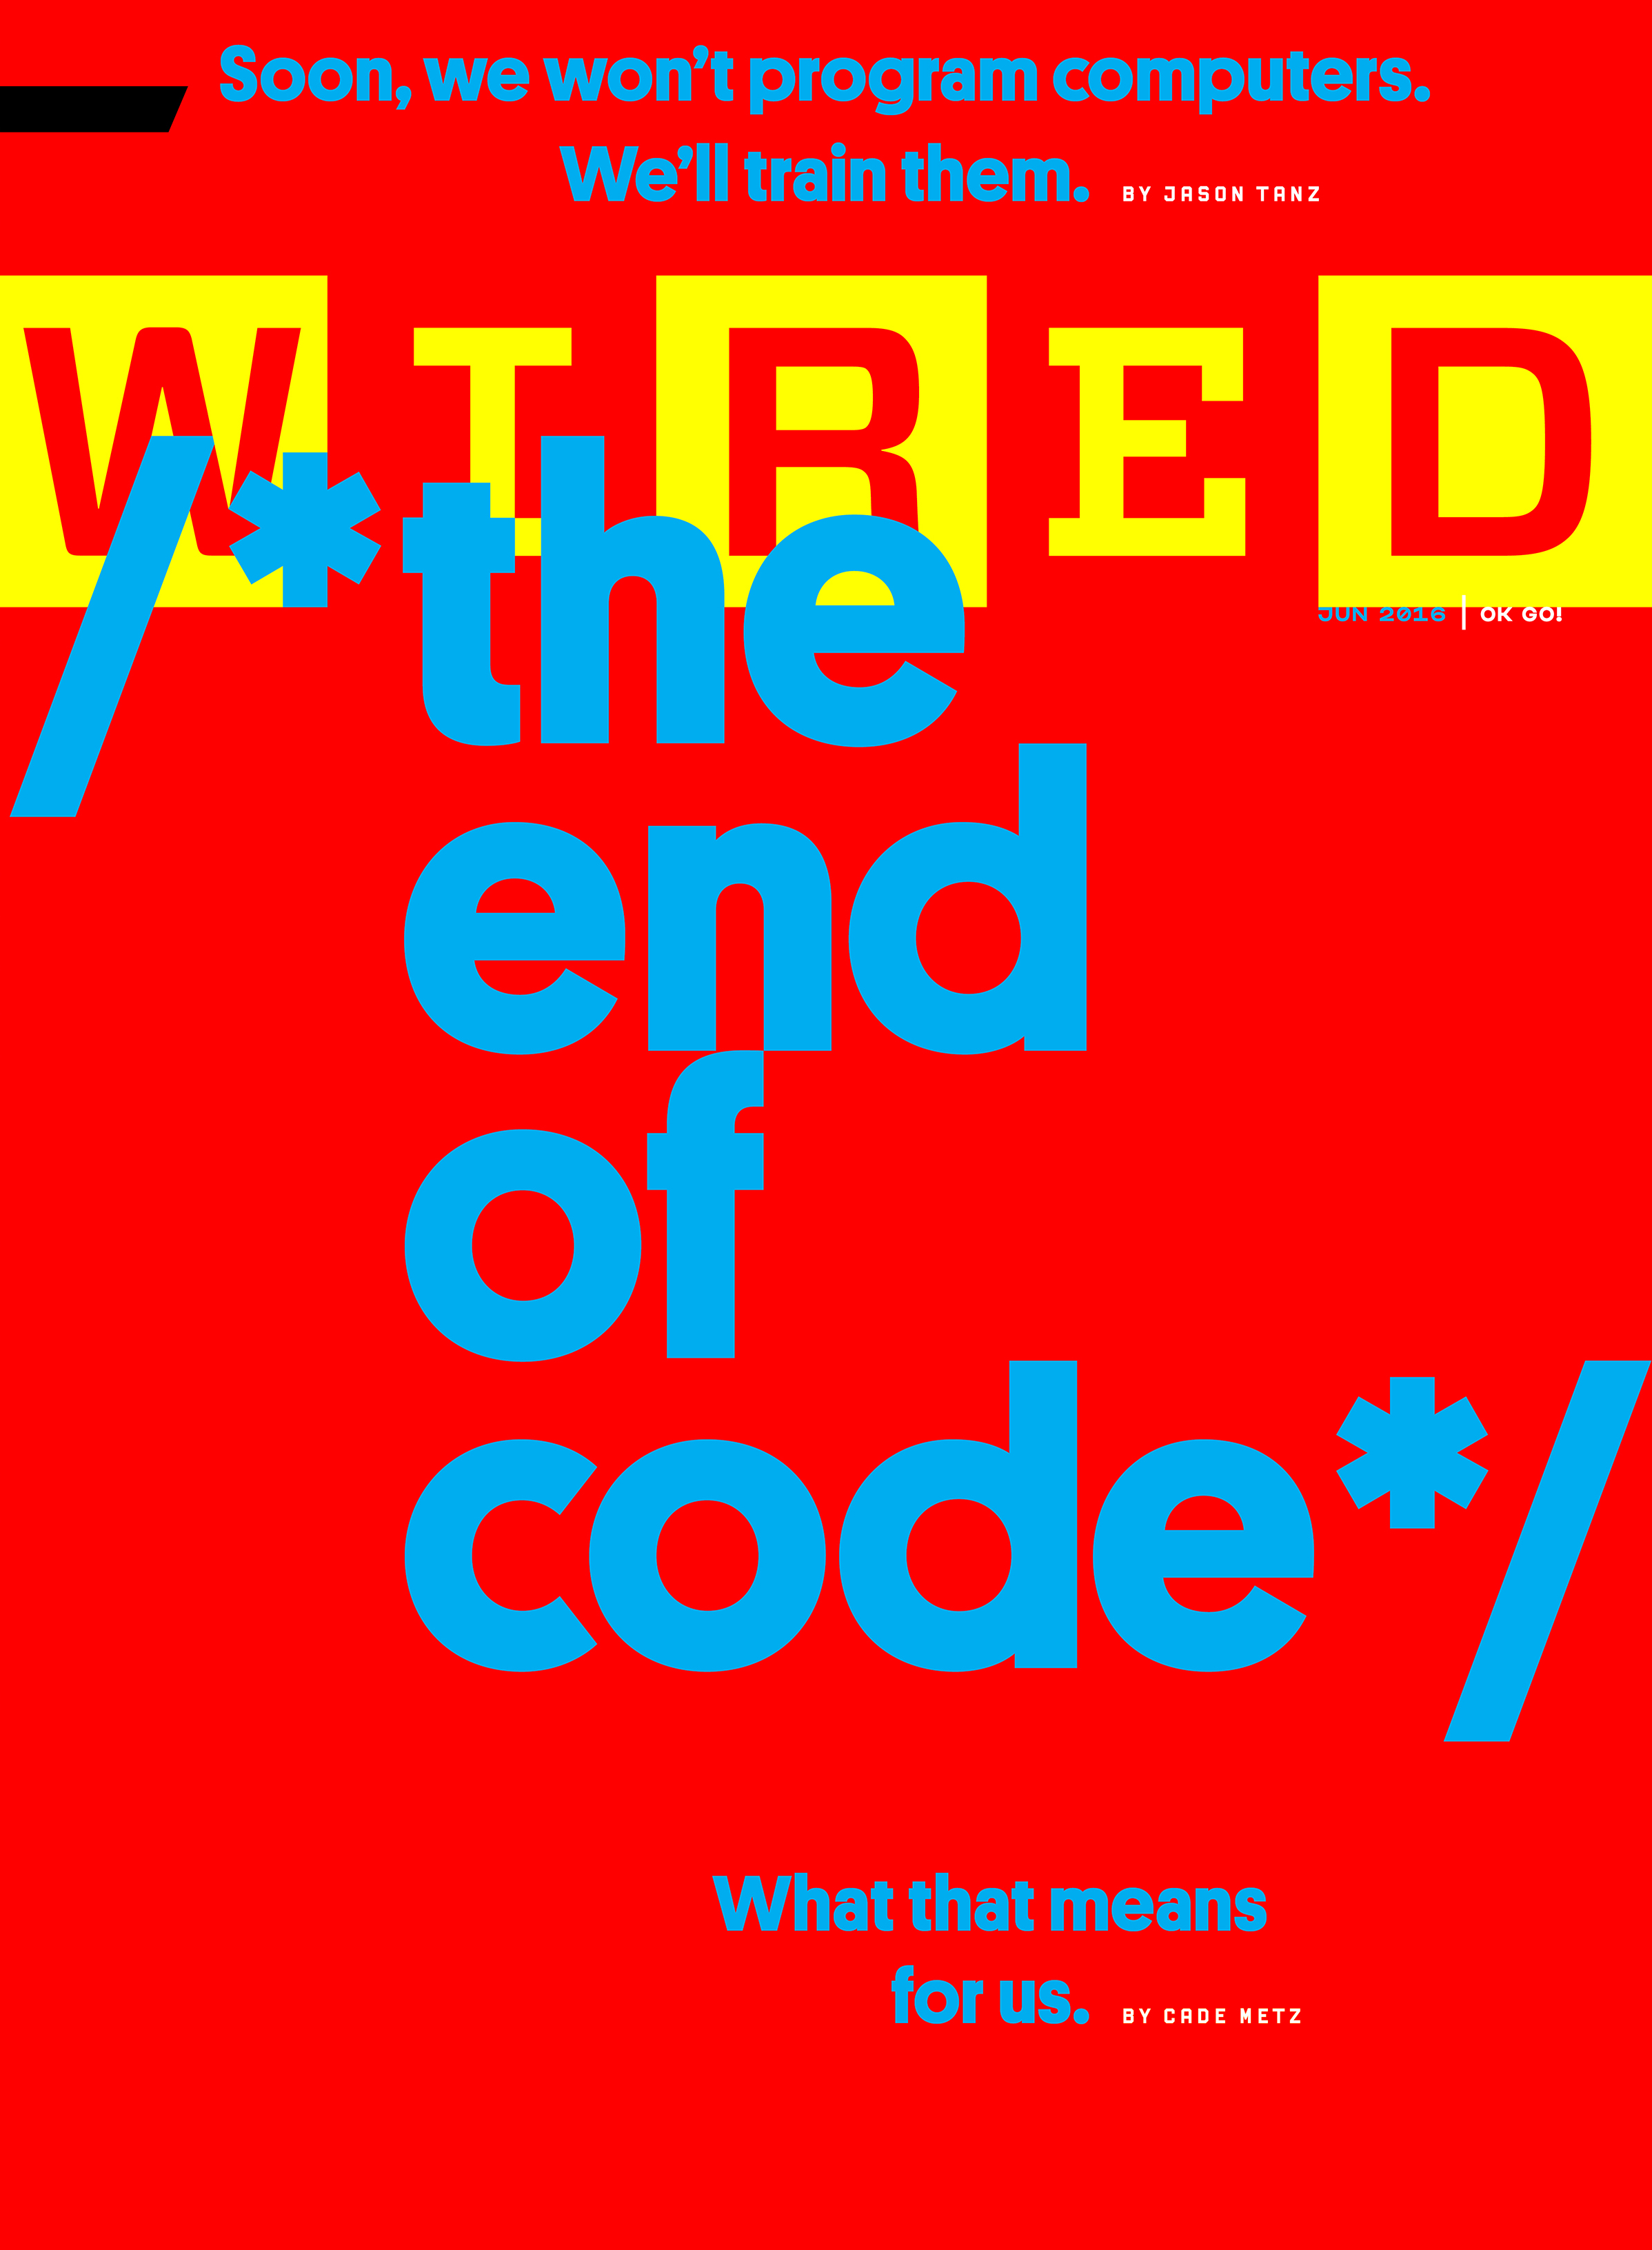 WIRED - "The End of Code," June